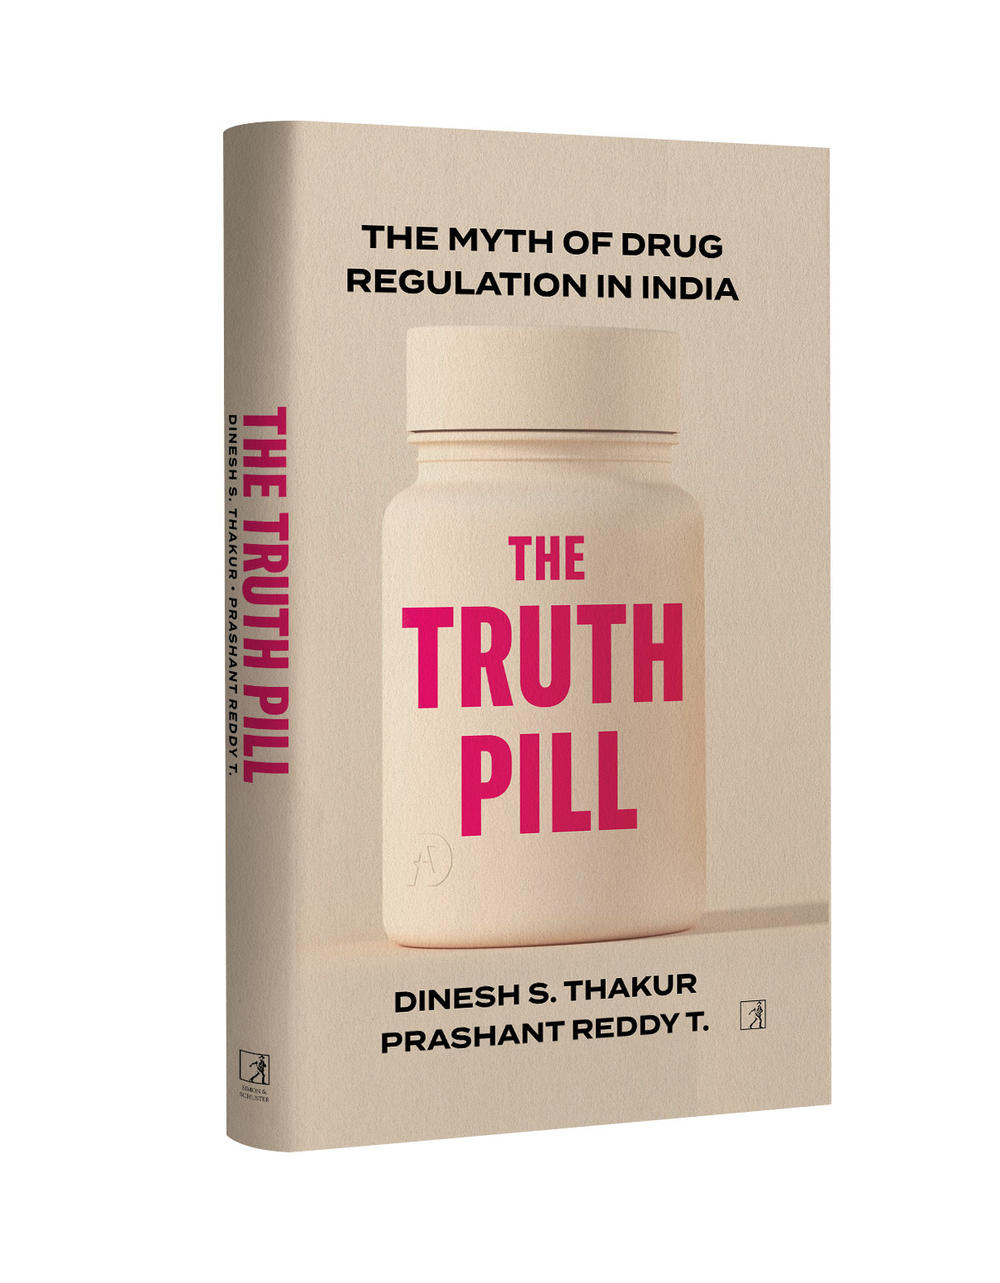 <em>The Truth Pill: The Myth of Drug Regulation in India,</em> by Dinesh S Thakur and Prashant T Reddy tells the story of India's many failures to regulate its pharma industry and the consequences.